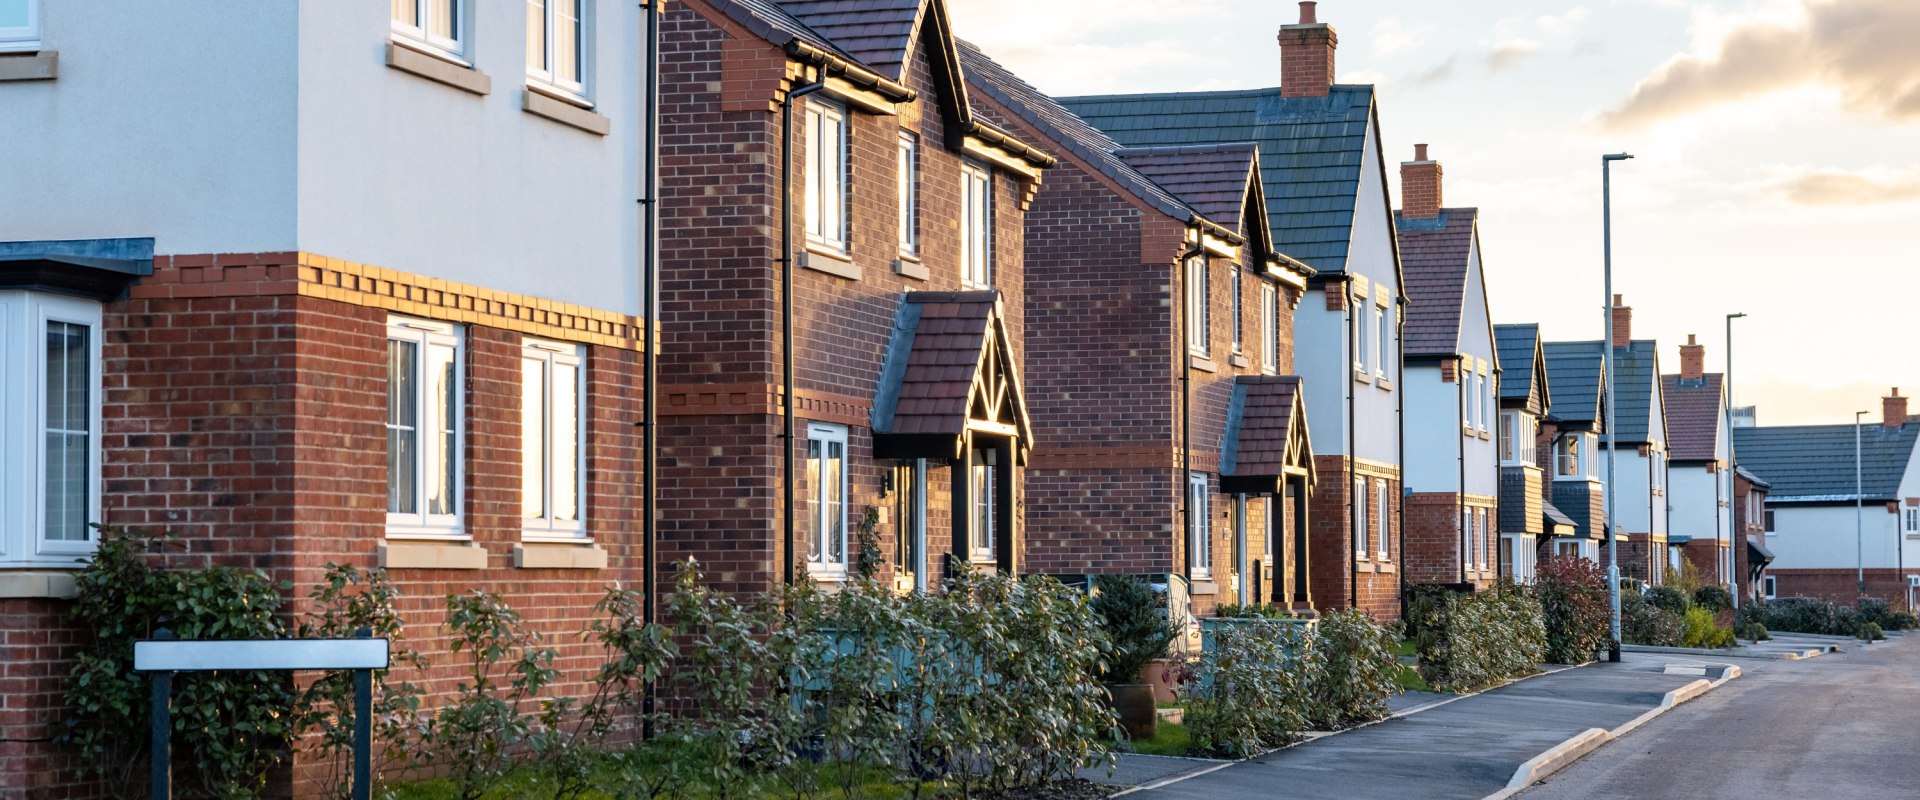 Getting a Buy-to-Let Mortgage in the UK: What You Need to Know